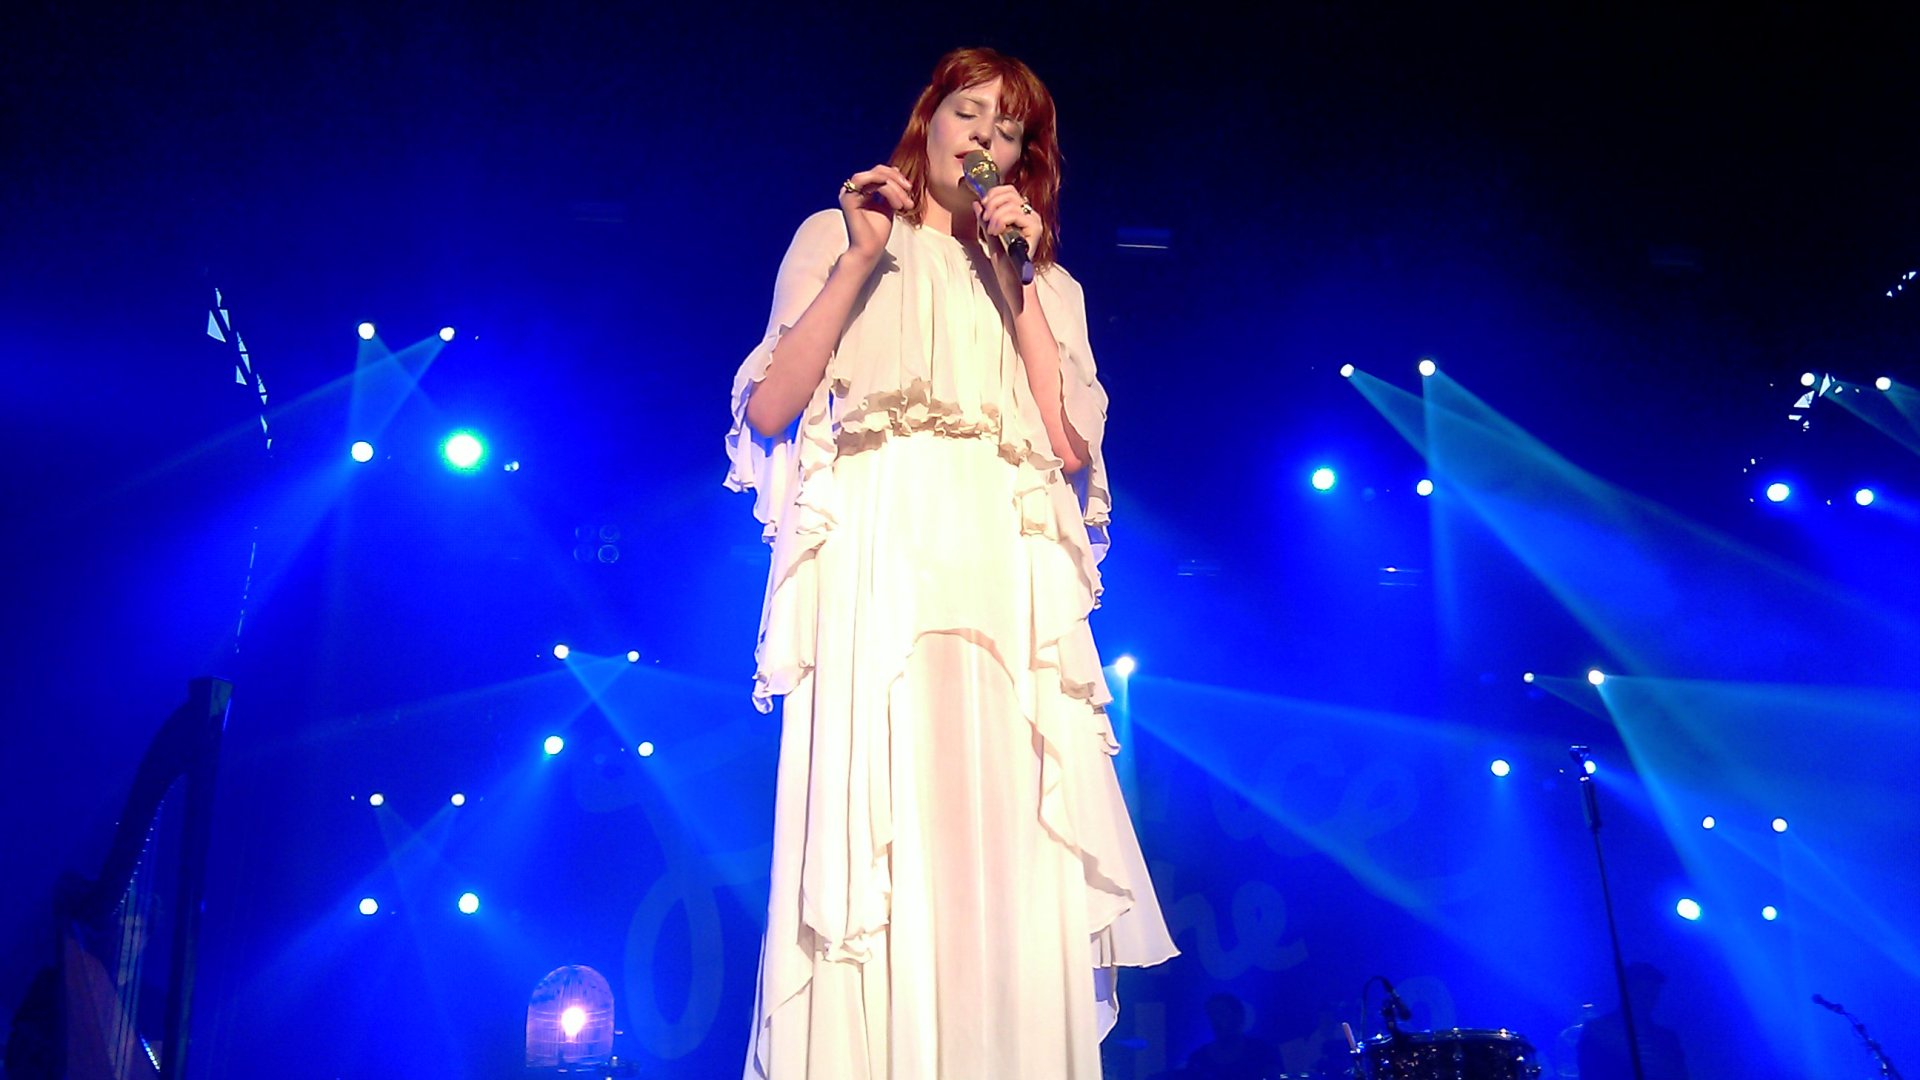 Florence And The Machine Puter Wallpaper Desktop Background